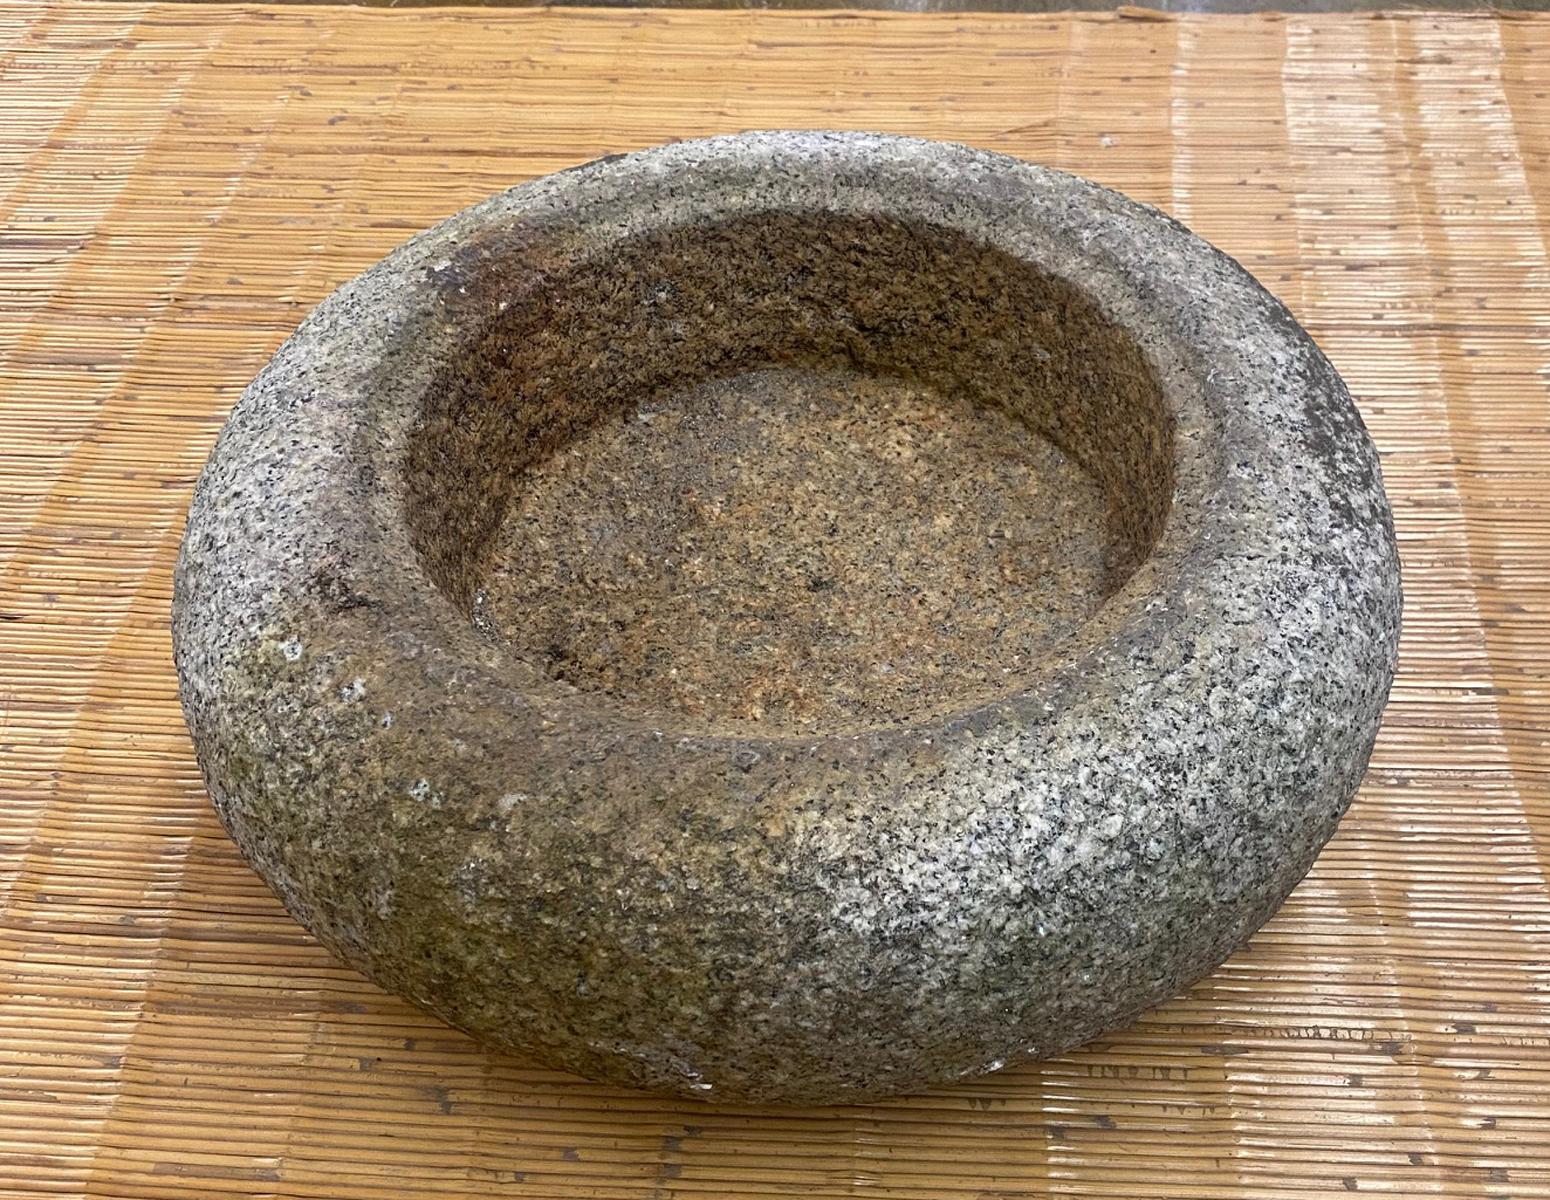 A small scale water trough is often a feature in a Japanese Garden, with dripping water. This granite Tsukubai is perfectly shaped with out chips or cracks. Old and beautiful.